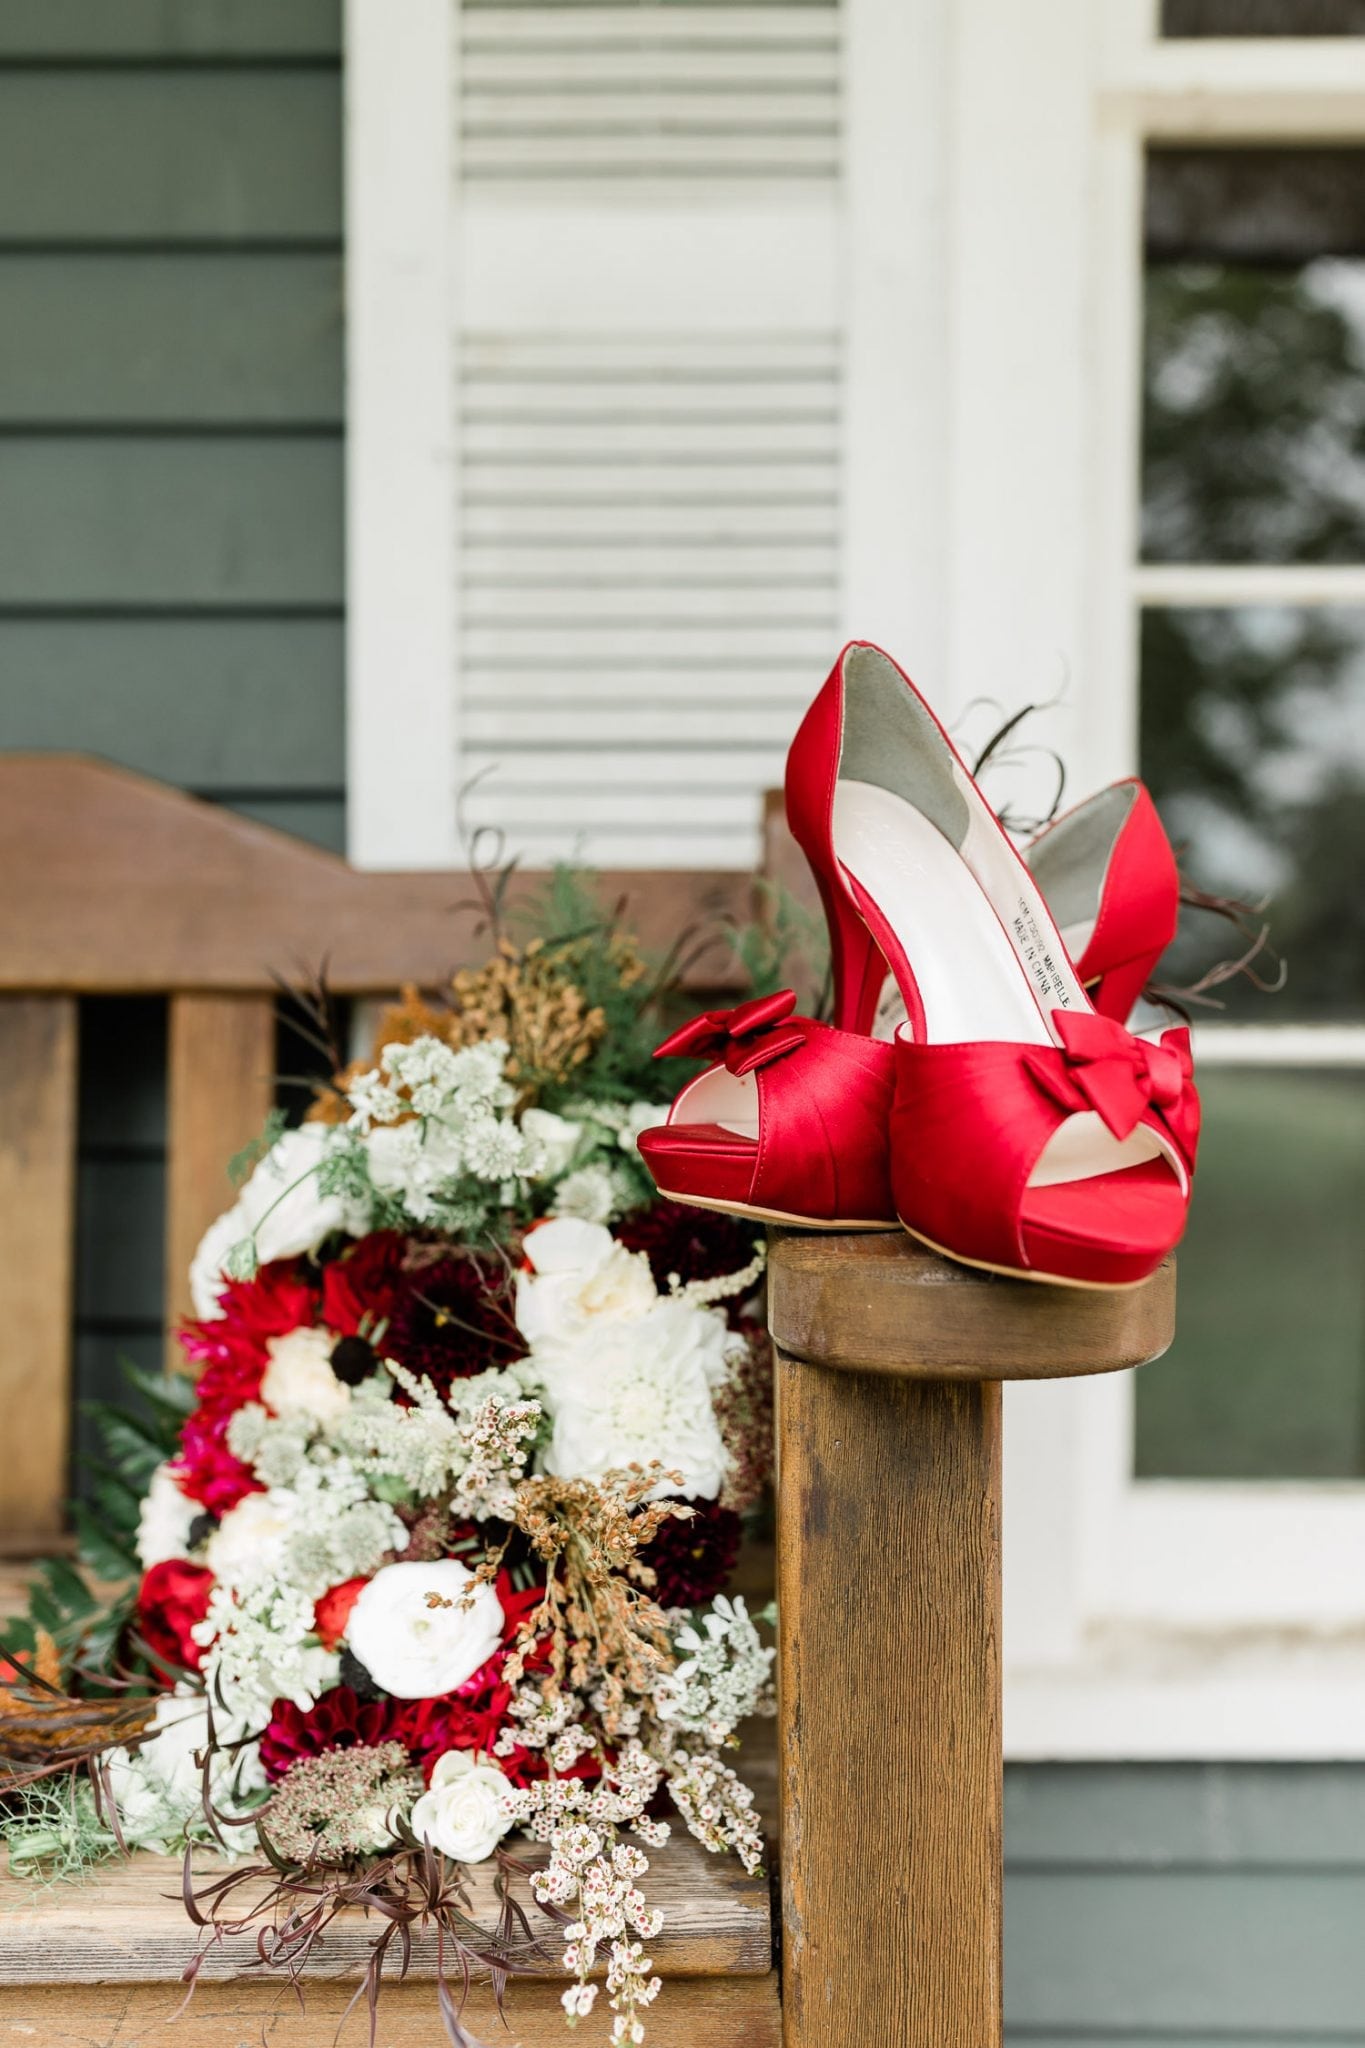 Wedding shoes and bouquet rustic style | Vancouver wedding photographer